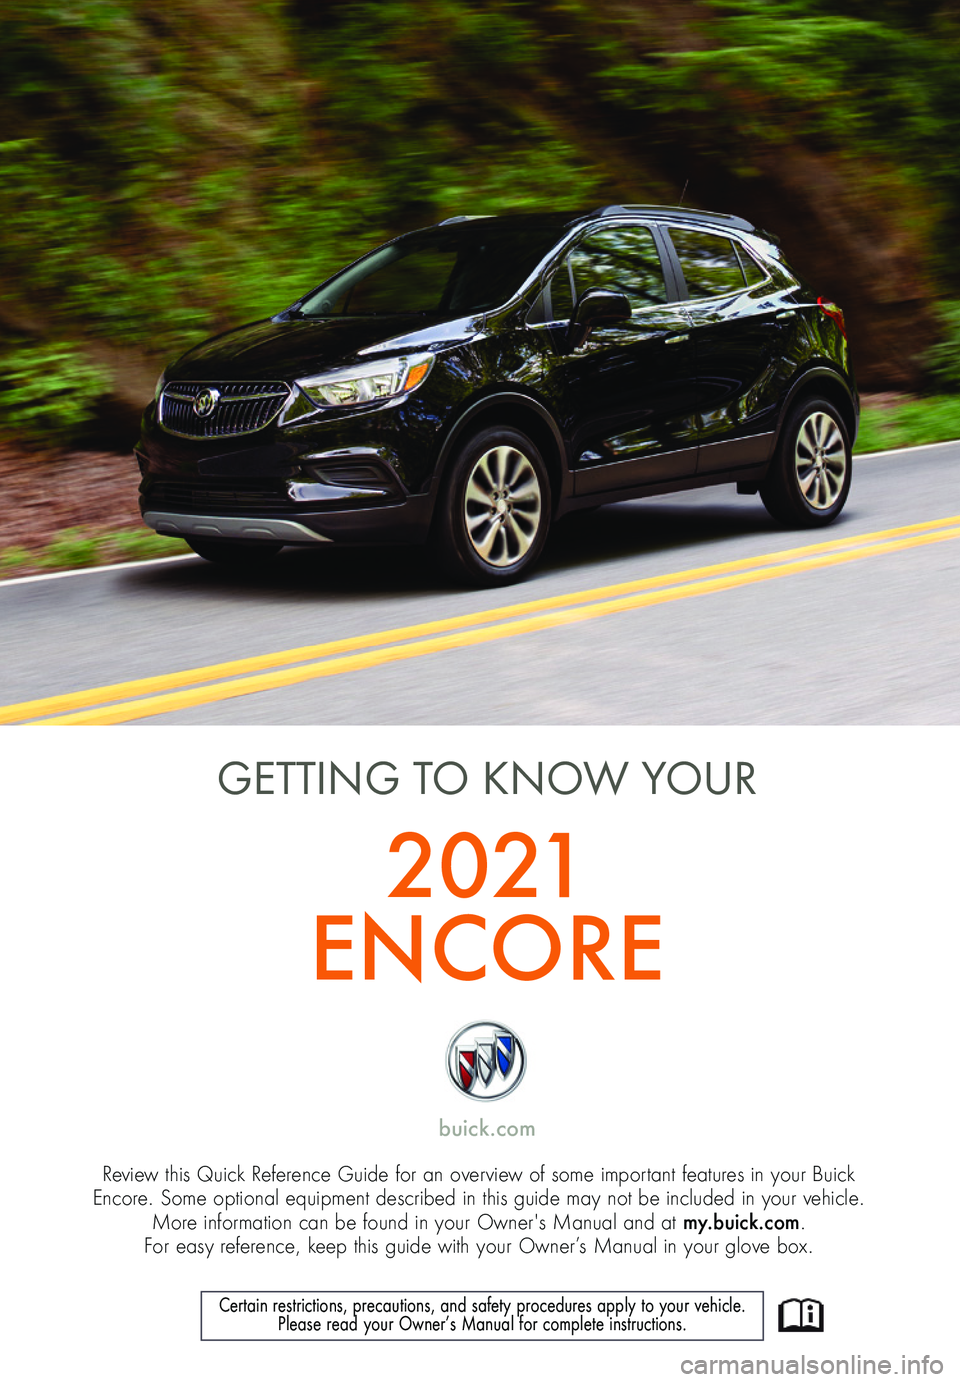 BUICK ENCORE 2021  Get To Know Guide 1
Review this Quick Reference Guide for an overview of some important features in your Buick  Encore. Some optional equipment described in this guide may not be included in your vehicle.  More informa